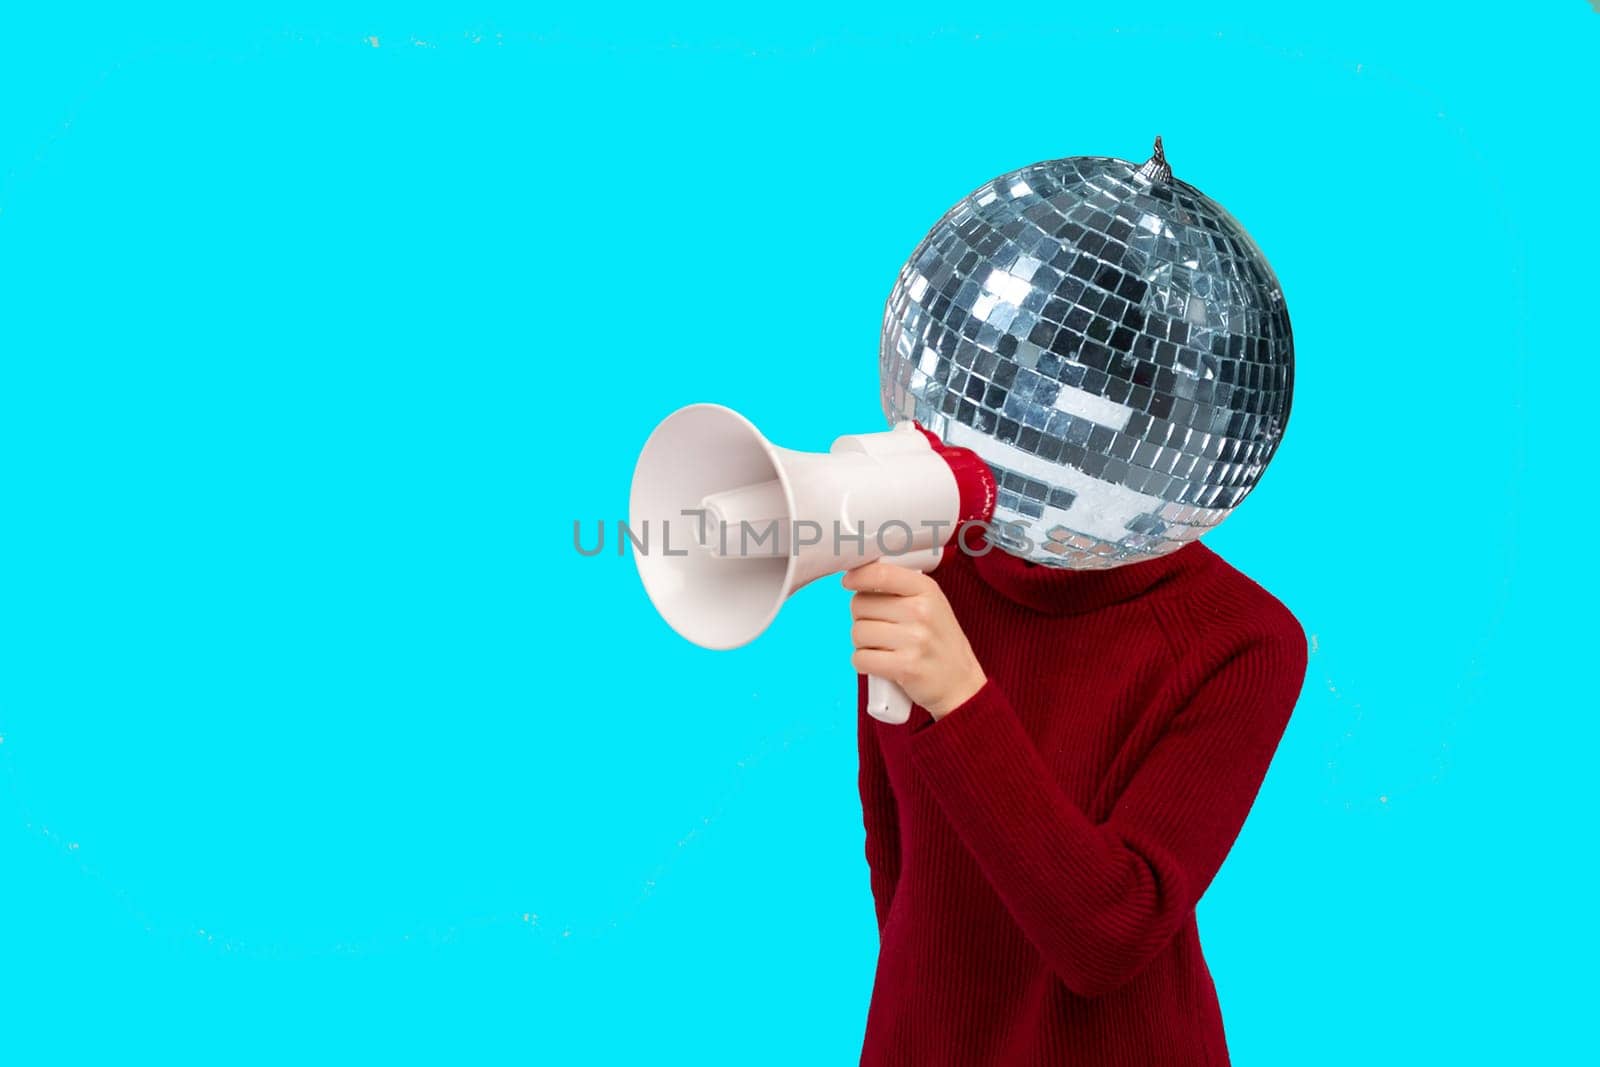 Abstract modern collage. woman with a mirrored disco ball instead of a head holding a megaphone on blue background